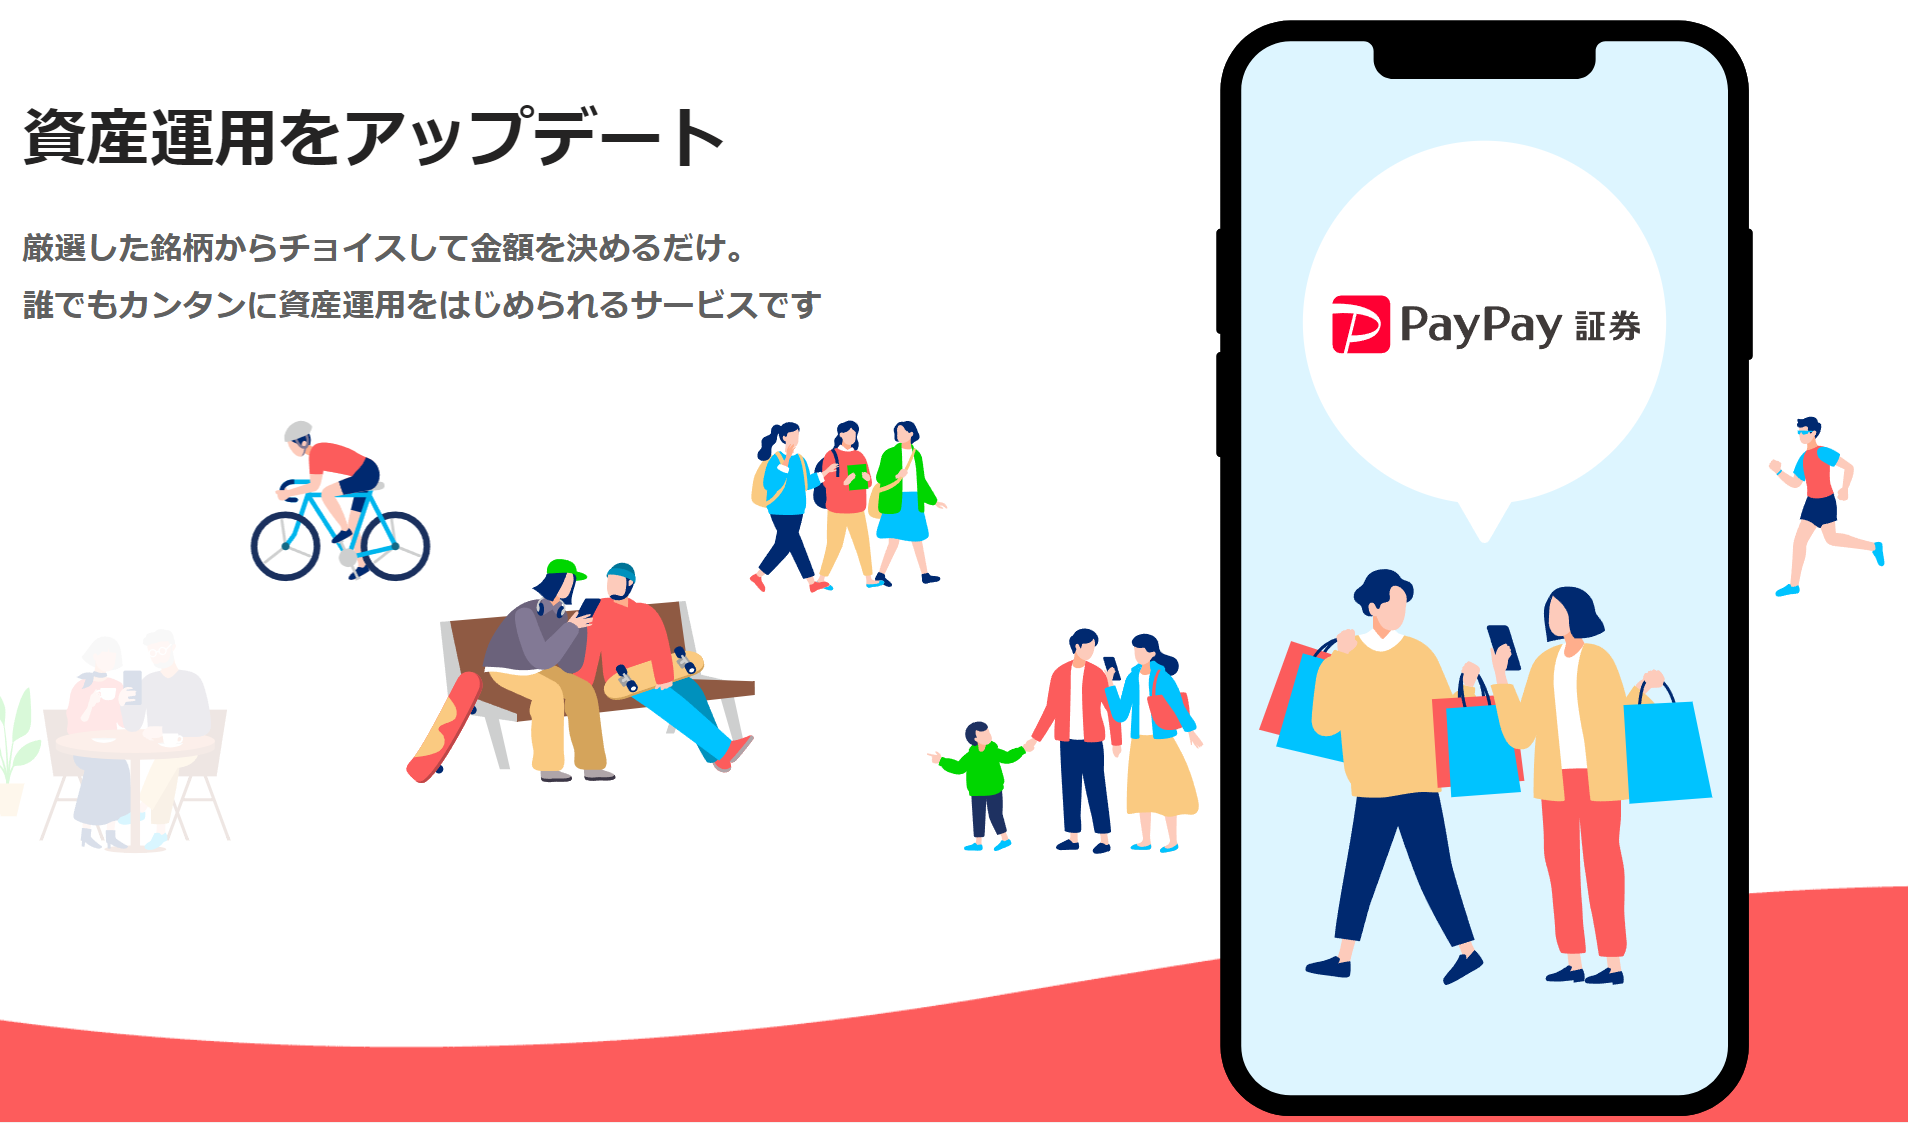 PayPay証券の伸長に驚きました